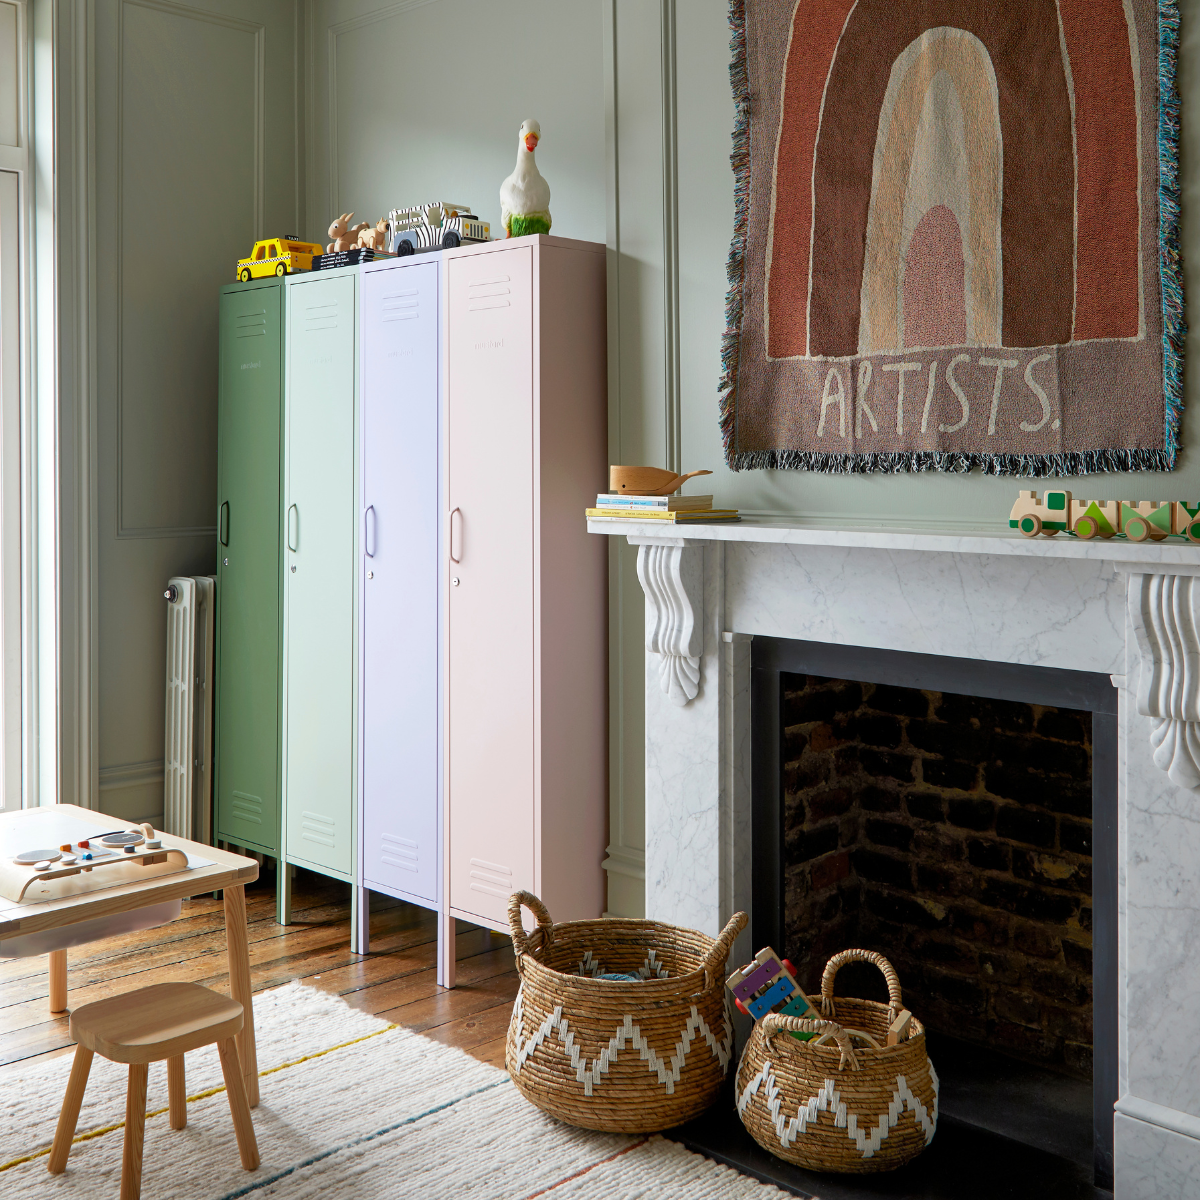 Four Mustard Made Skinny Lockers in Olive, Sage, Lilac and Blush colours.